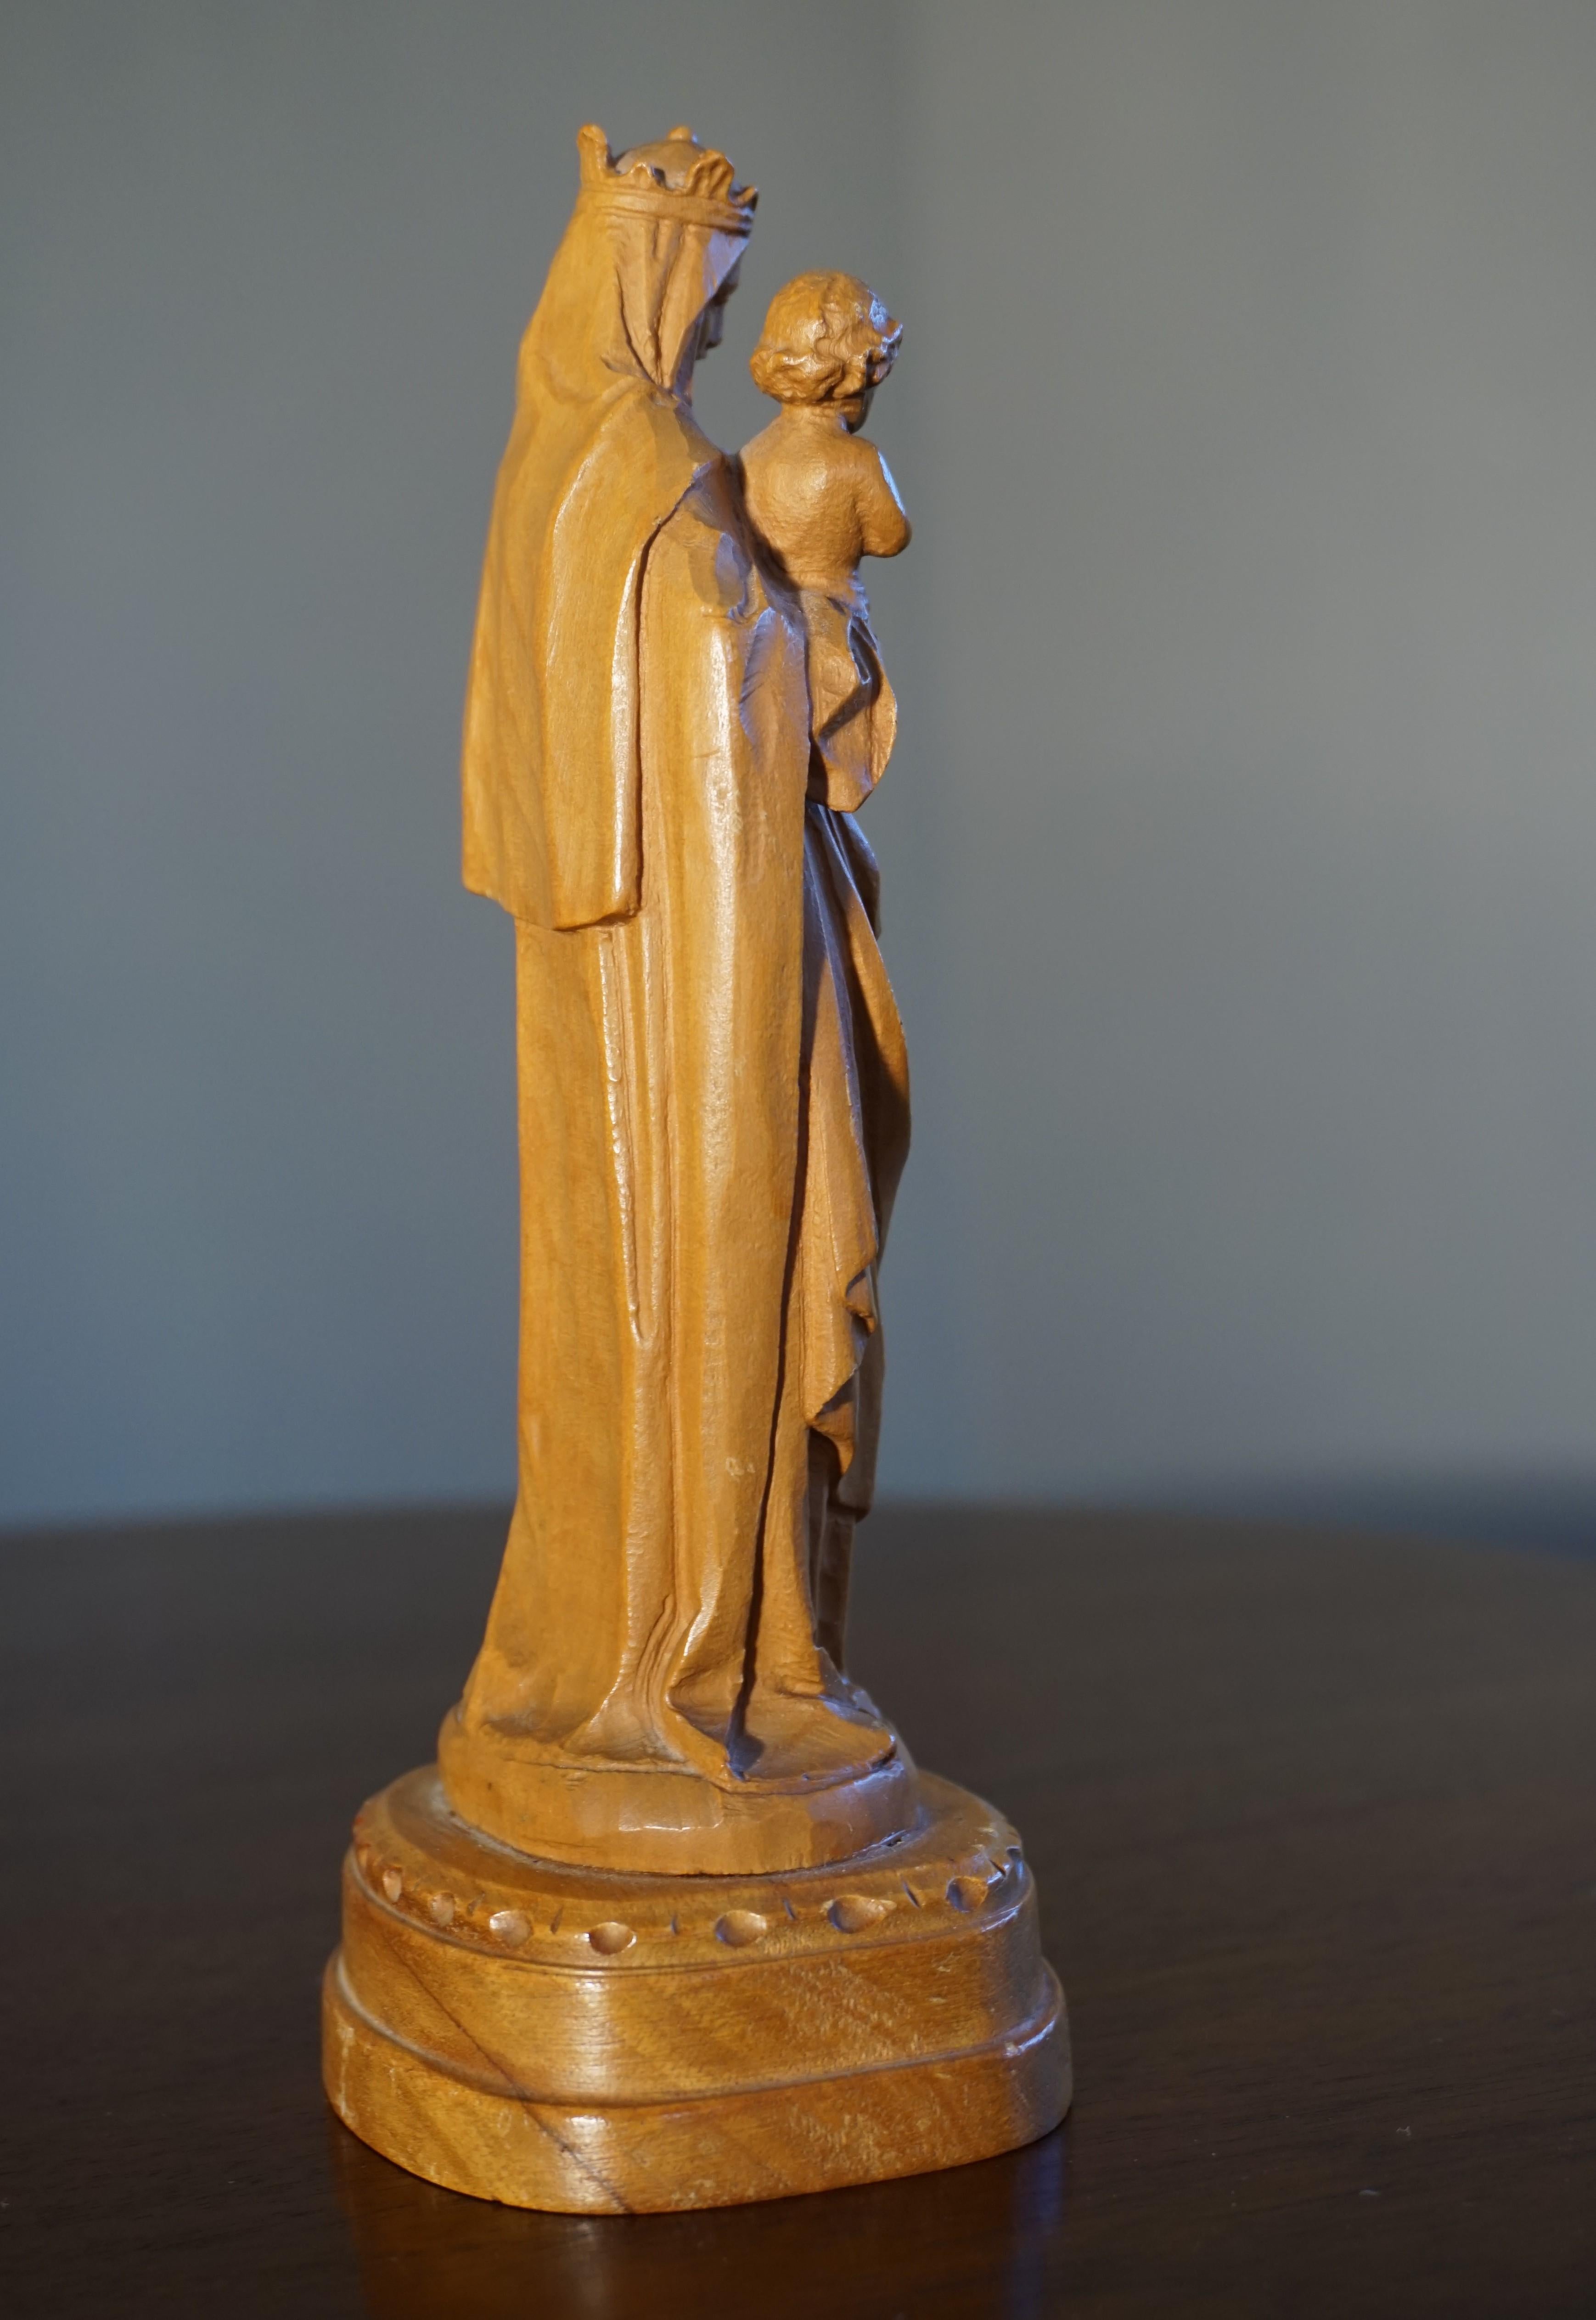 Wood Finest Quality, Hand Carved Miniature Statue of Mother Mary Holding Child Jesus